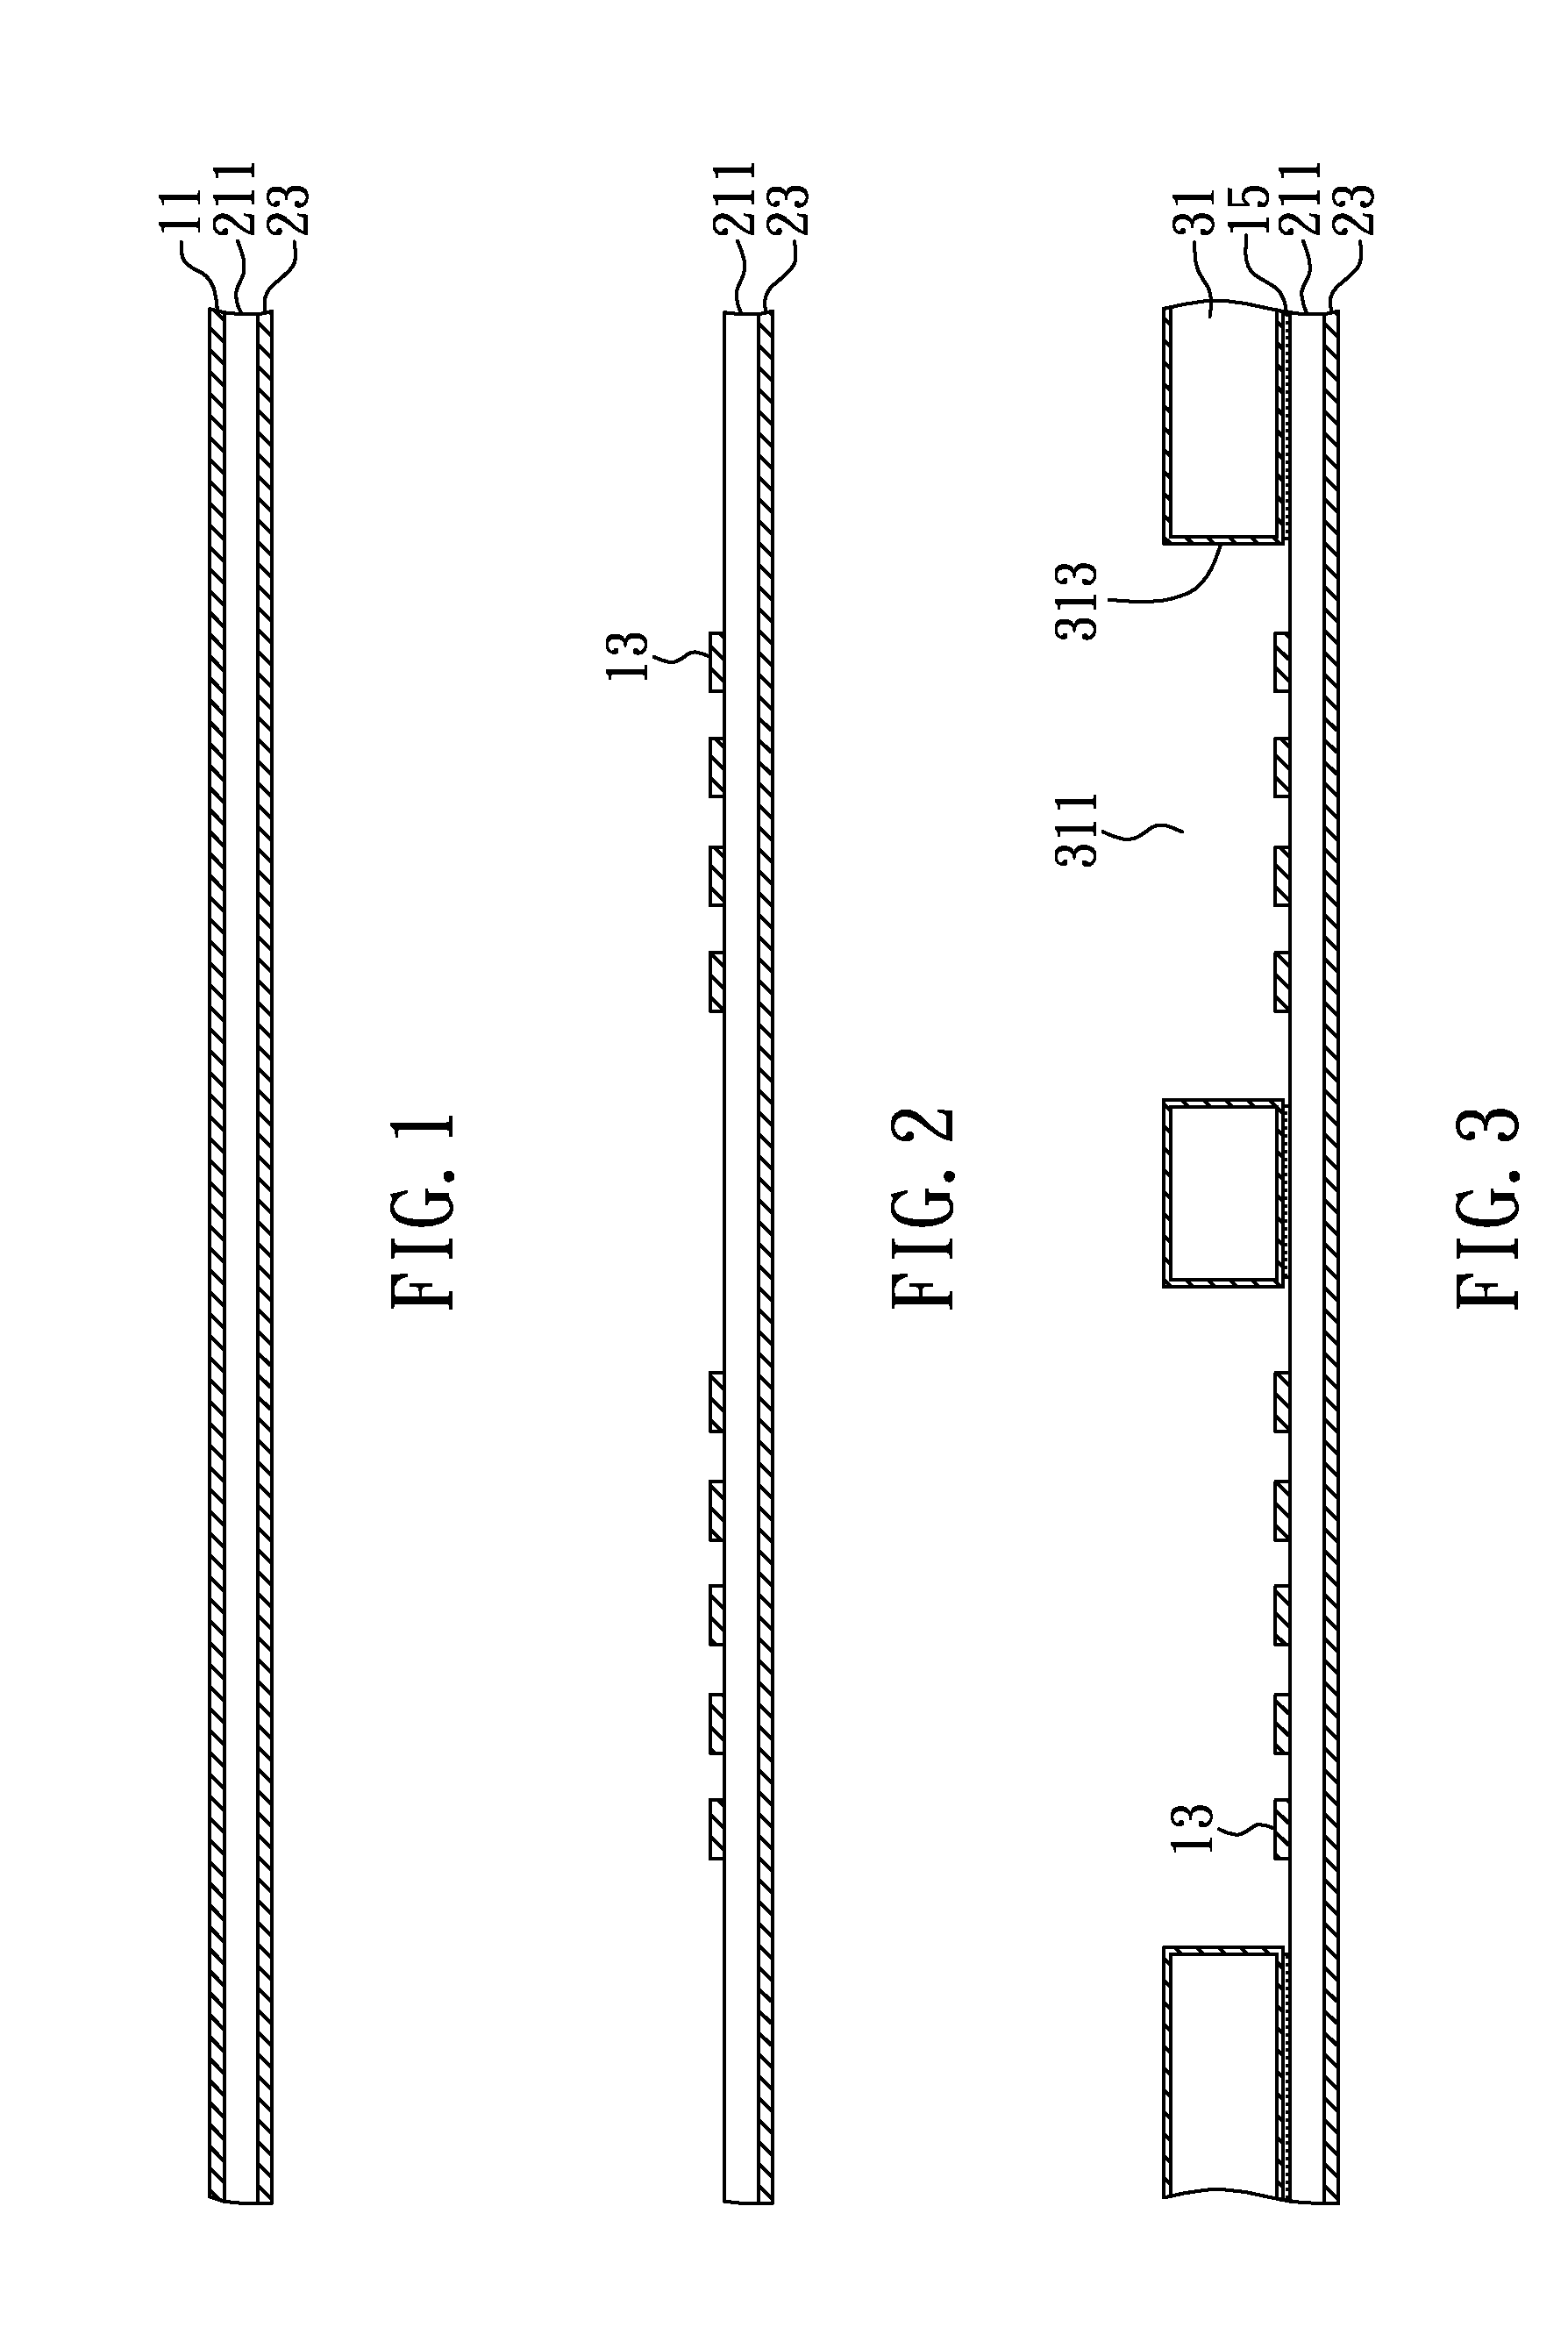 Multi-cavity wiring board for semiconductor assembly with internal electromagnetic shielding